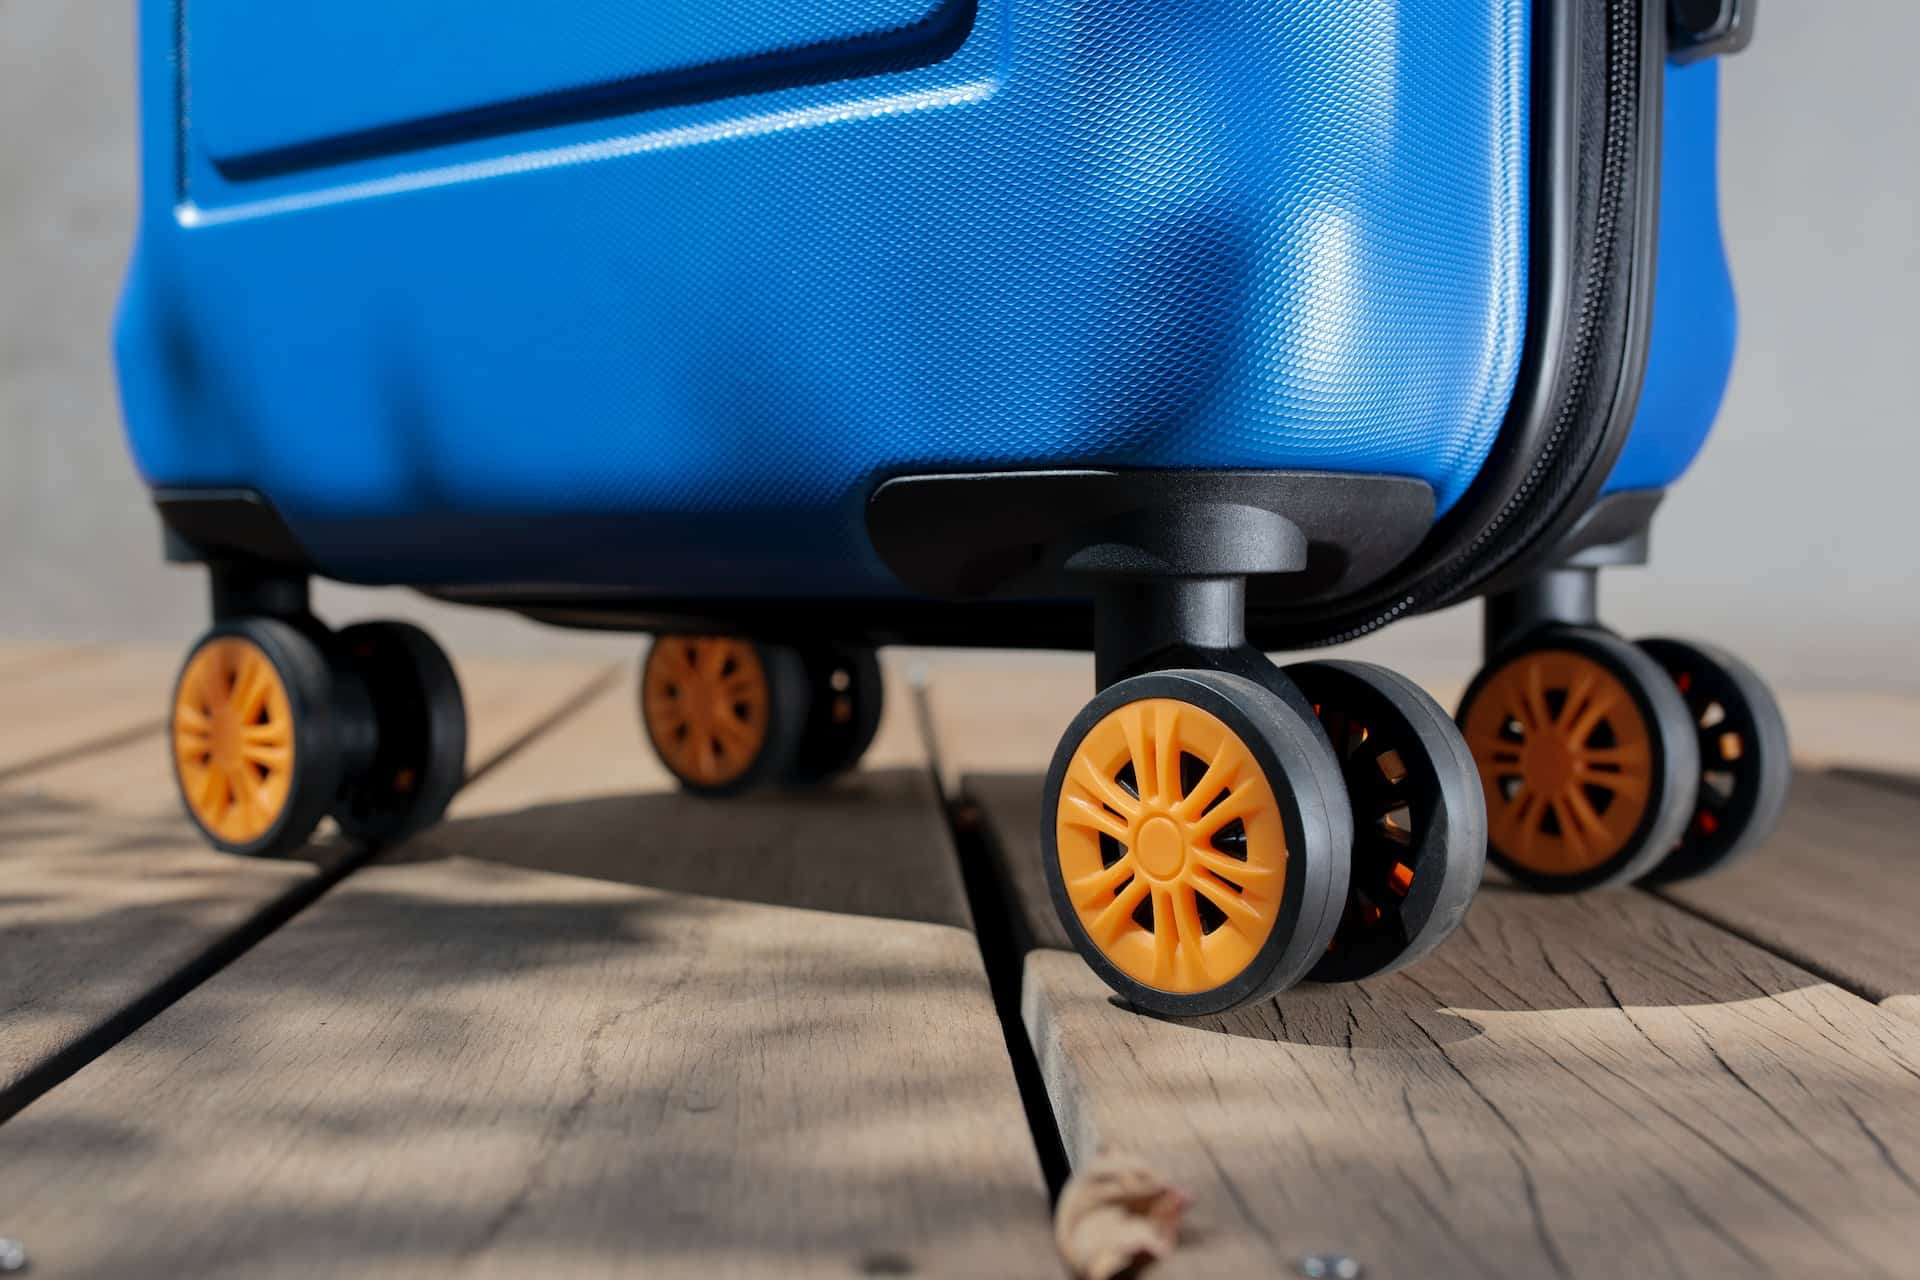 Can a 24-inch luggage be a carry-on? Wheels of a cabin suitcase orange wheels.